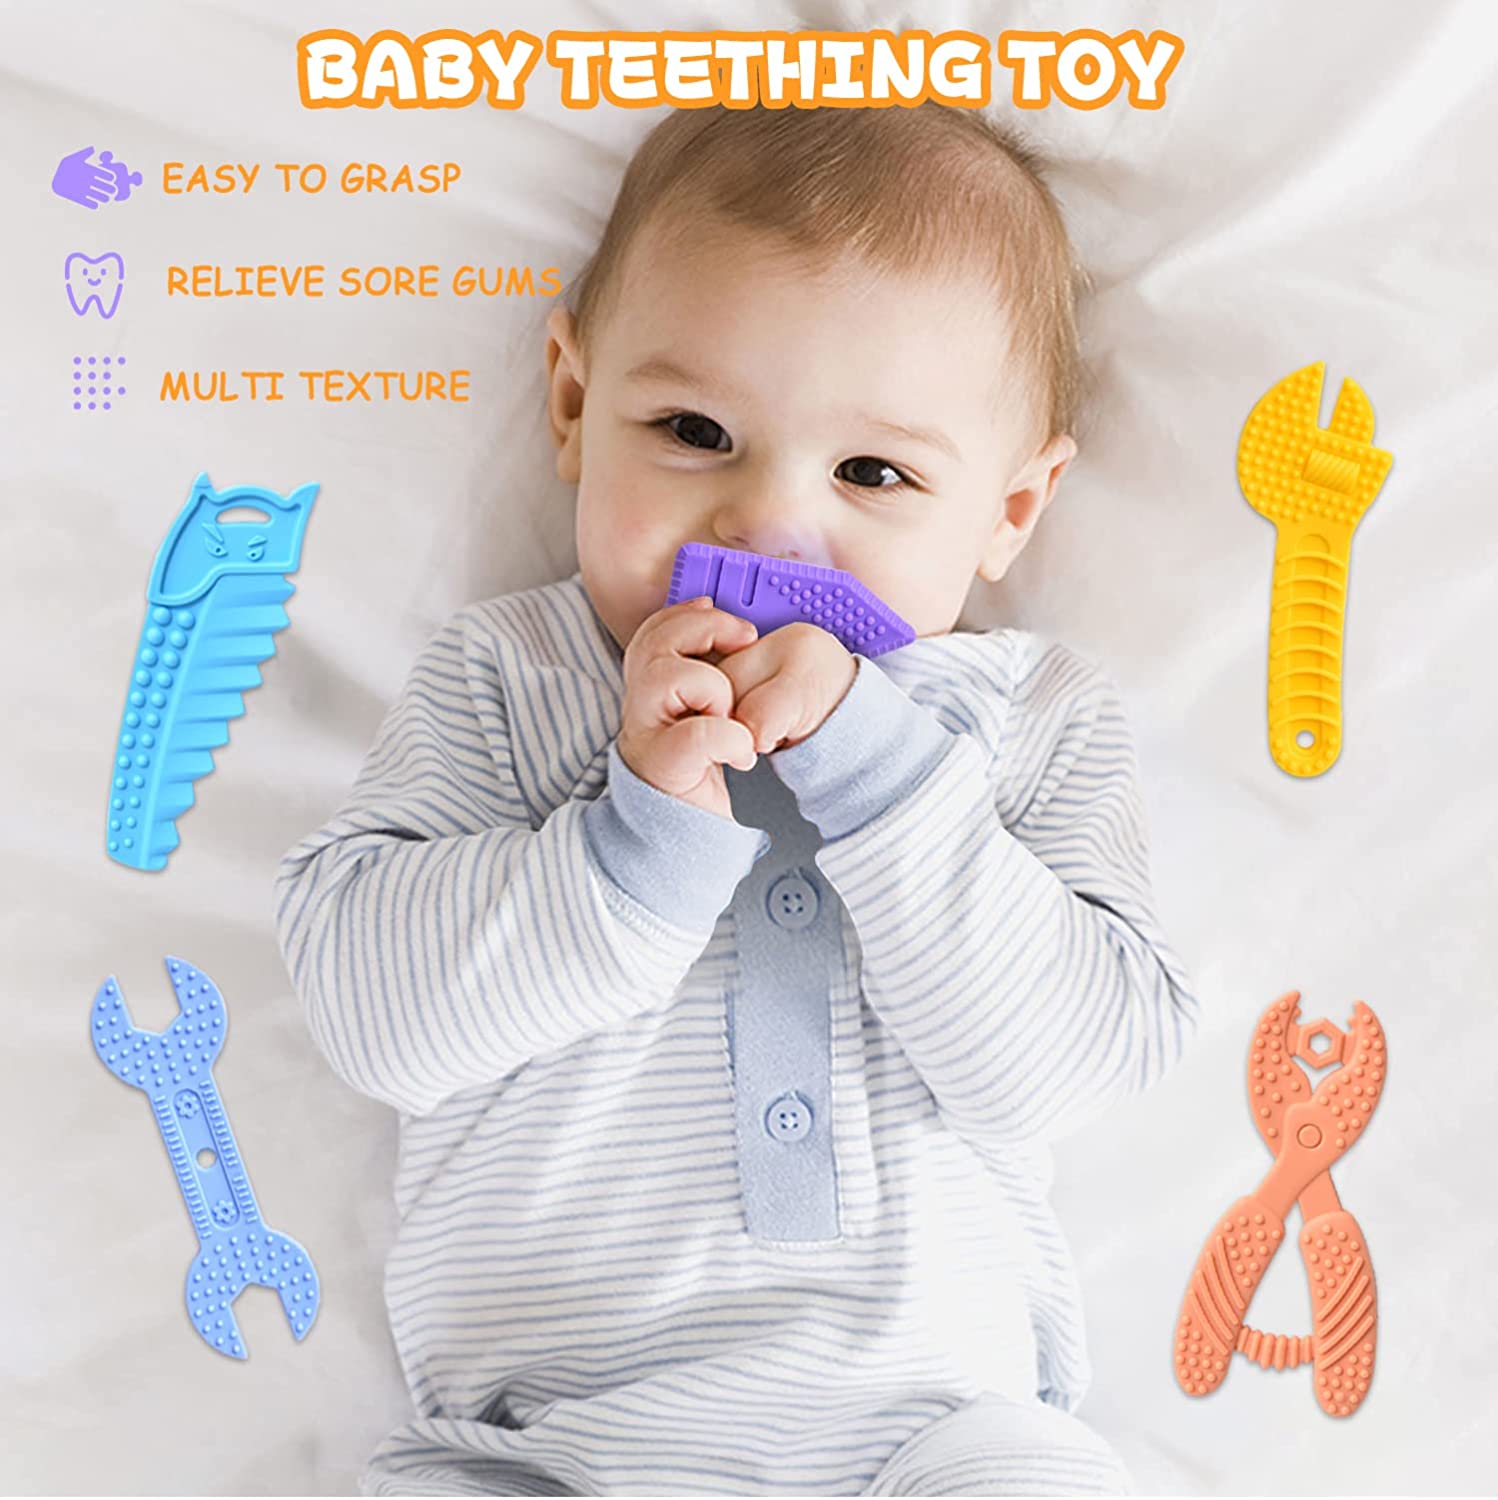 Are Amber Teething Necklaces Safe? Baby Teething Necklace Risks & Alternatives